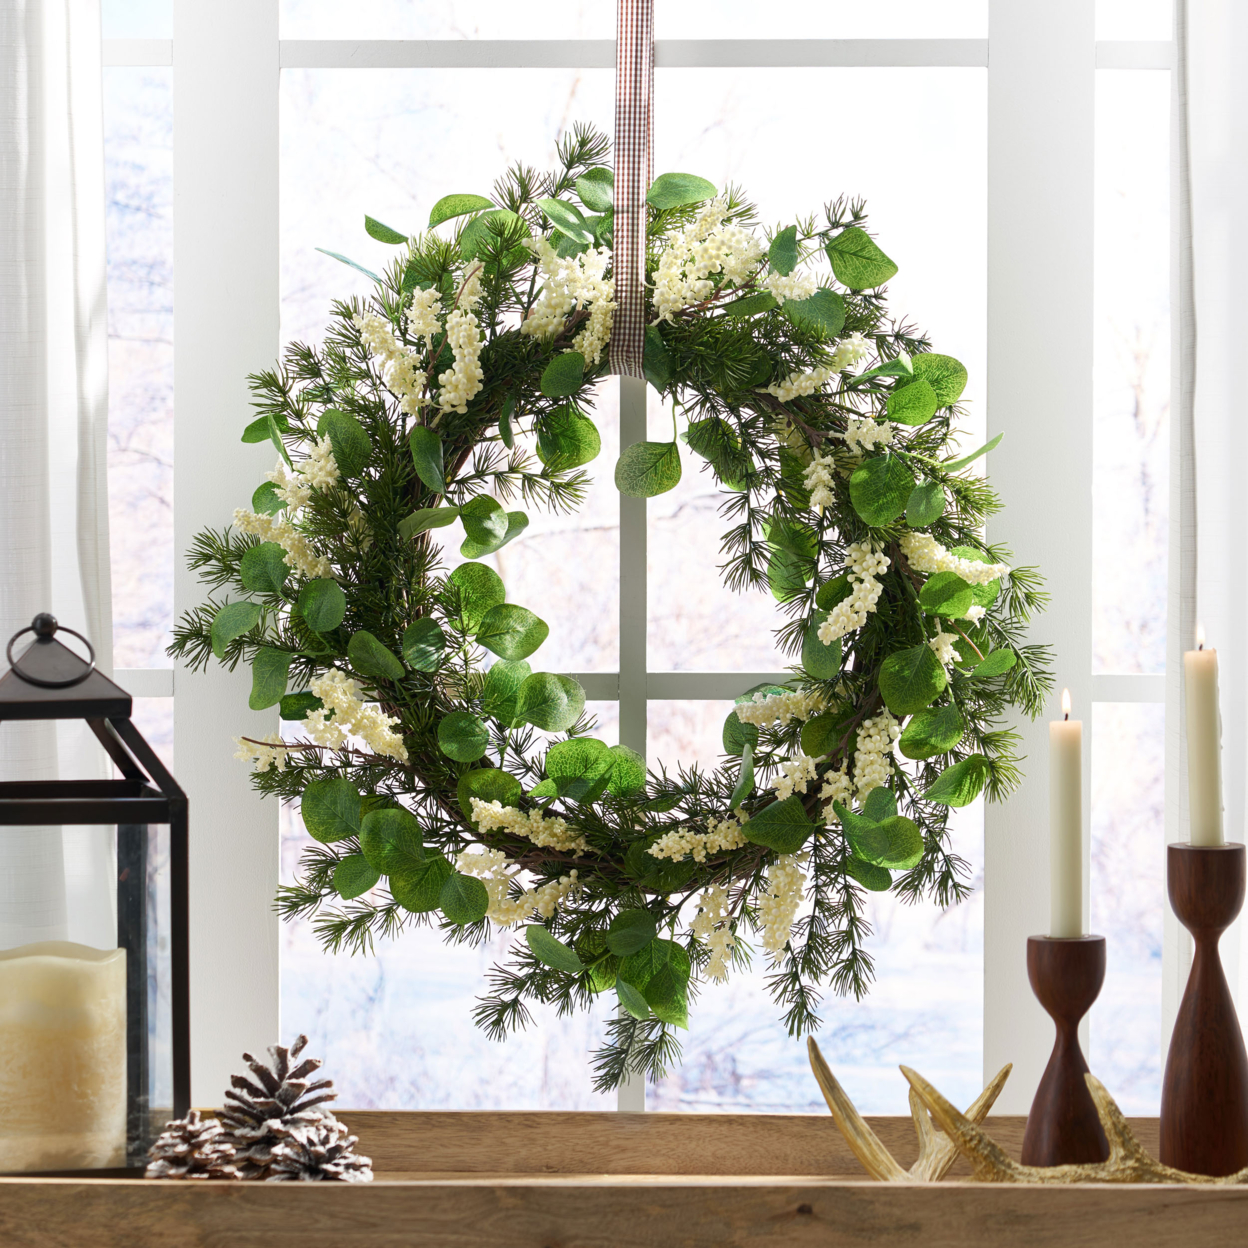 Davian 25.5 Inch Eucalyptus And Pine Artificial Wreath With Berries - Green + White